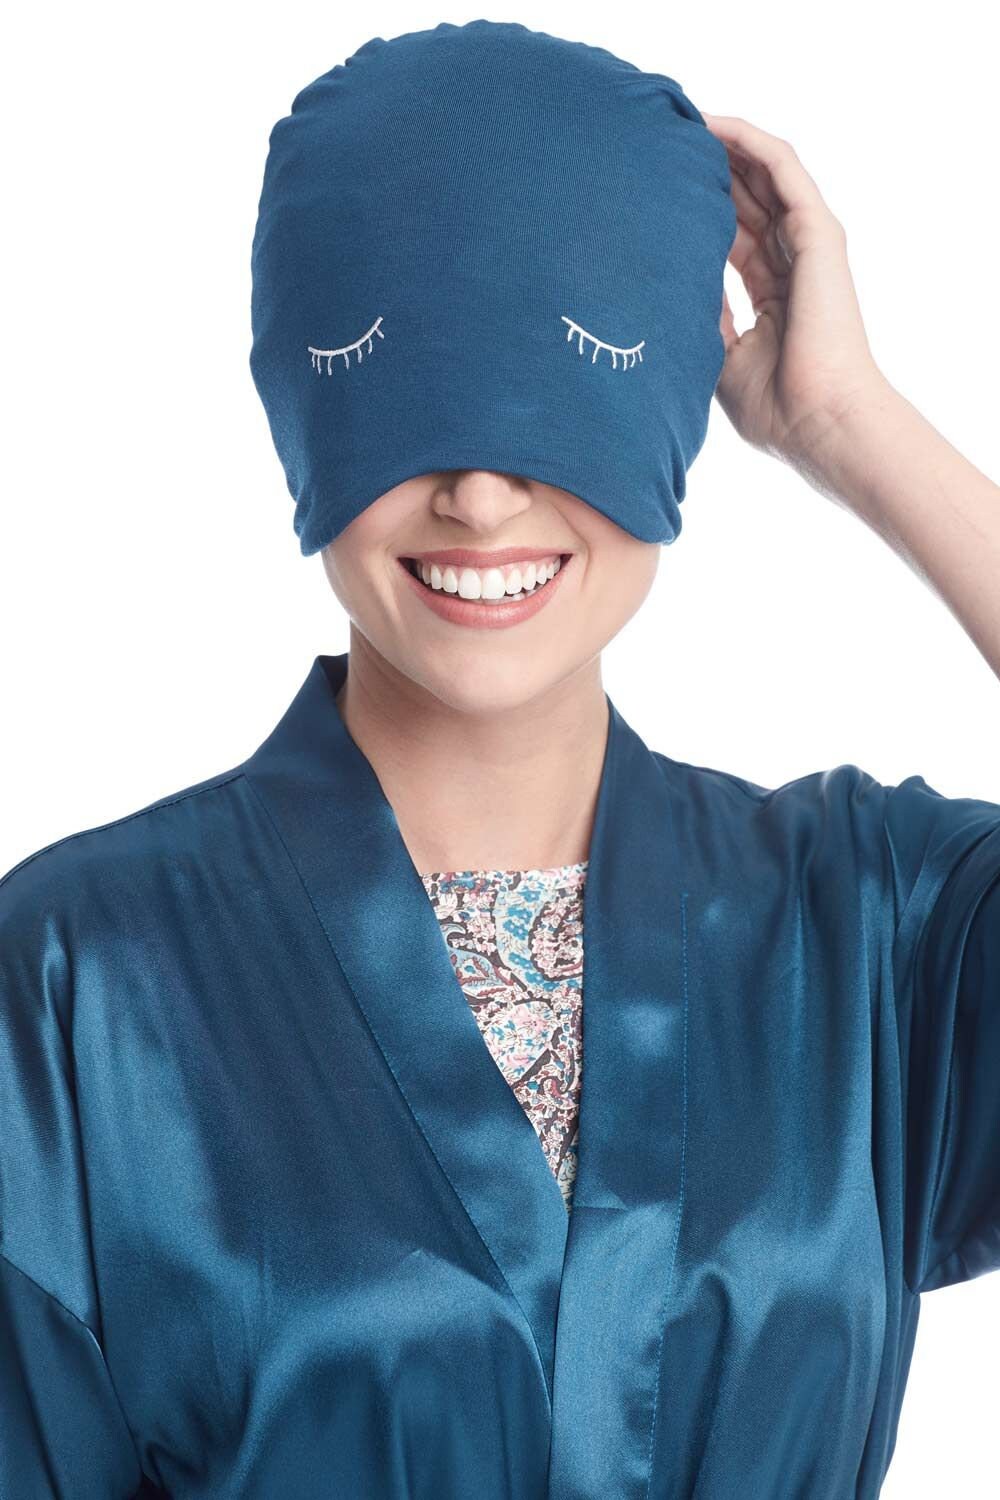 Travel Cap with Integrated Sleep Mask